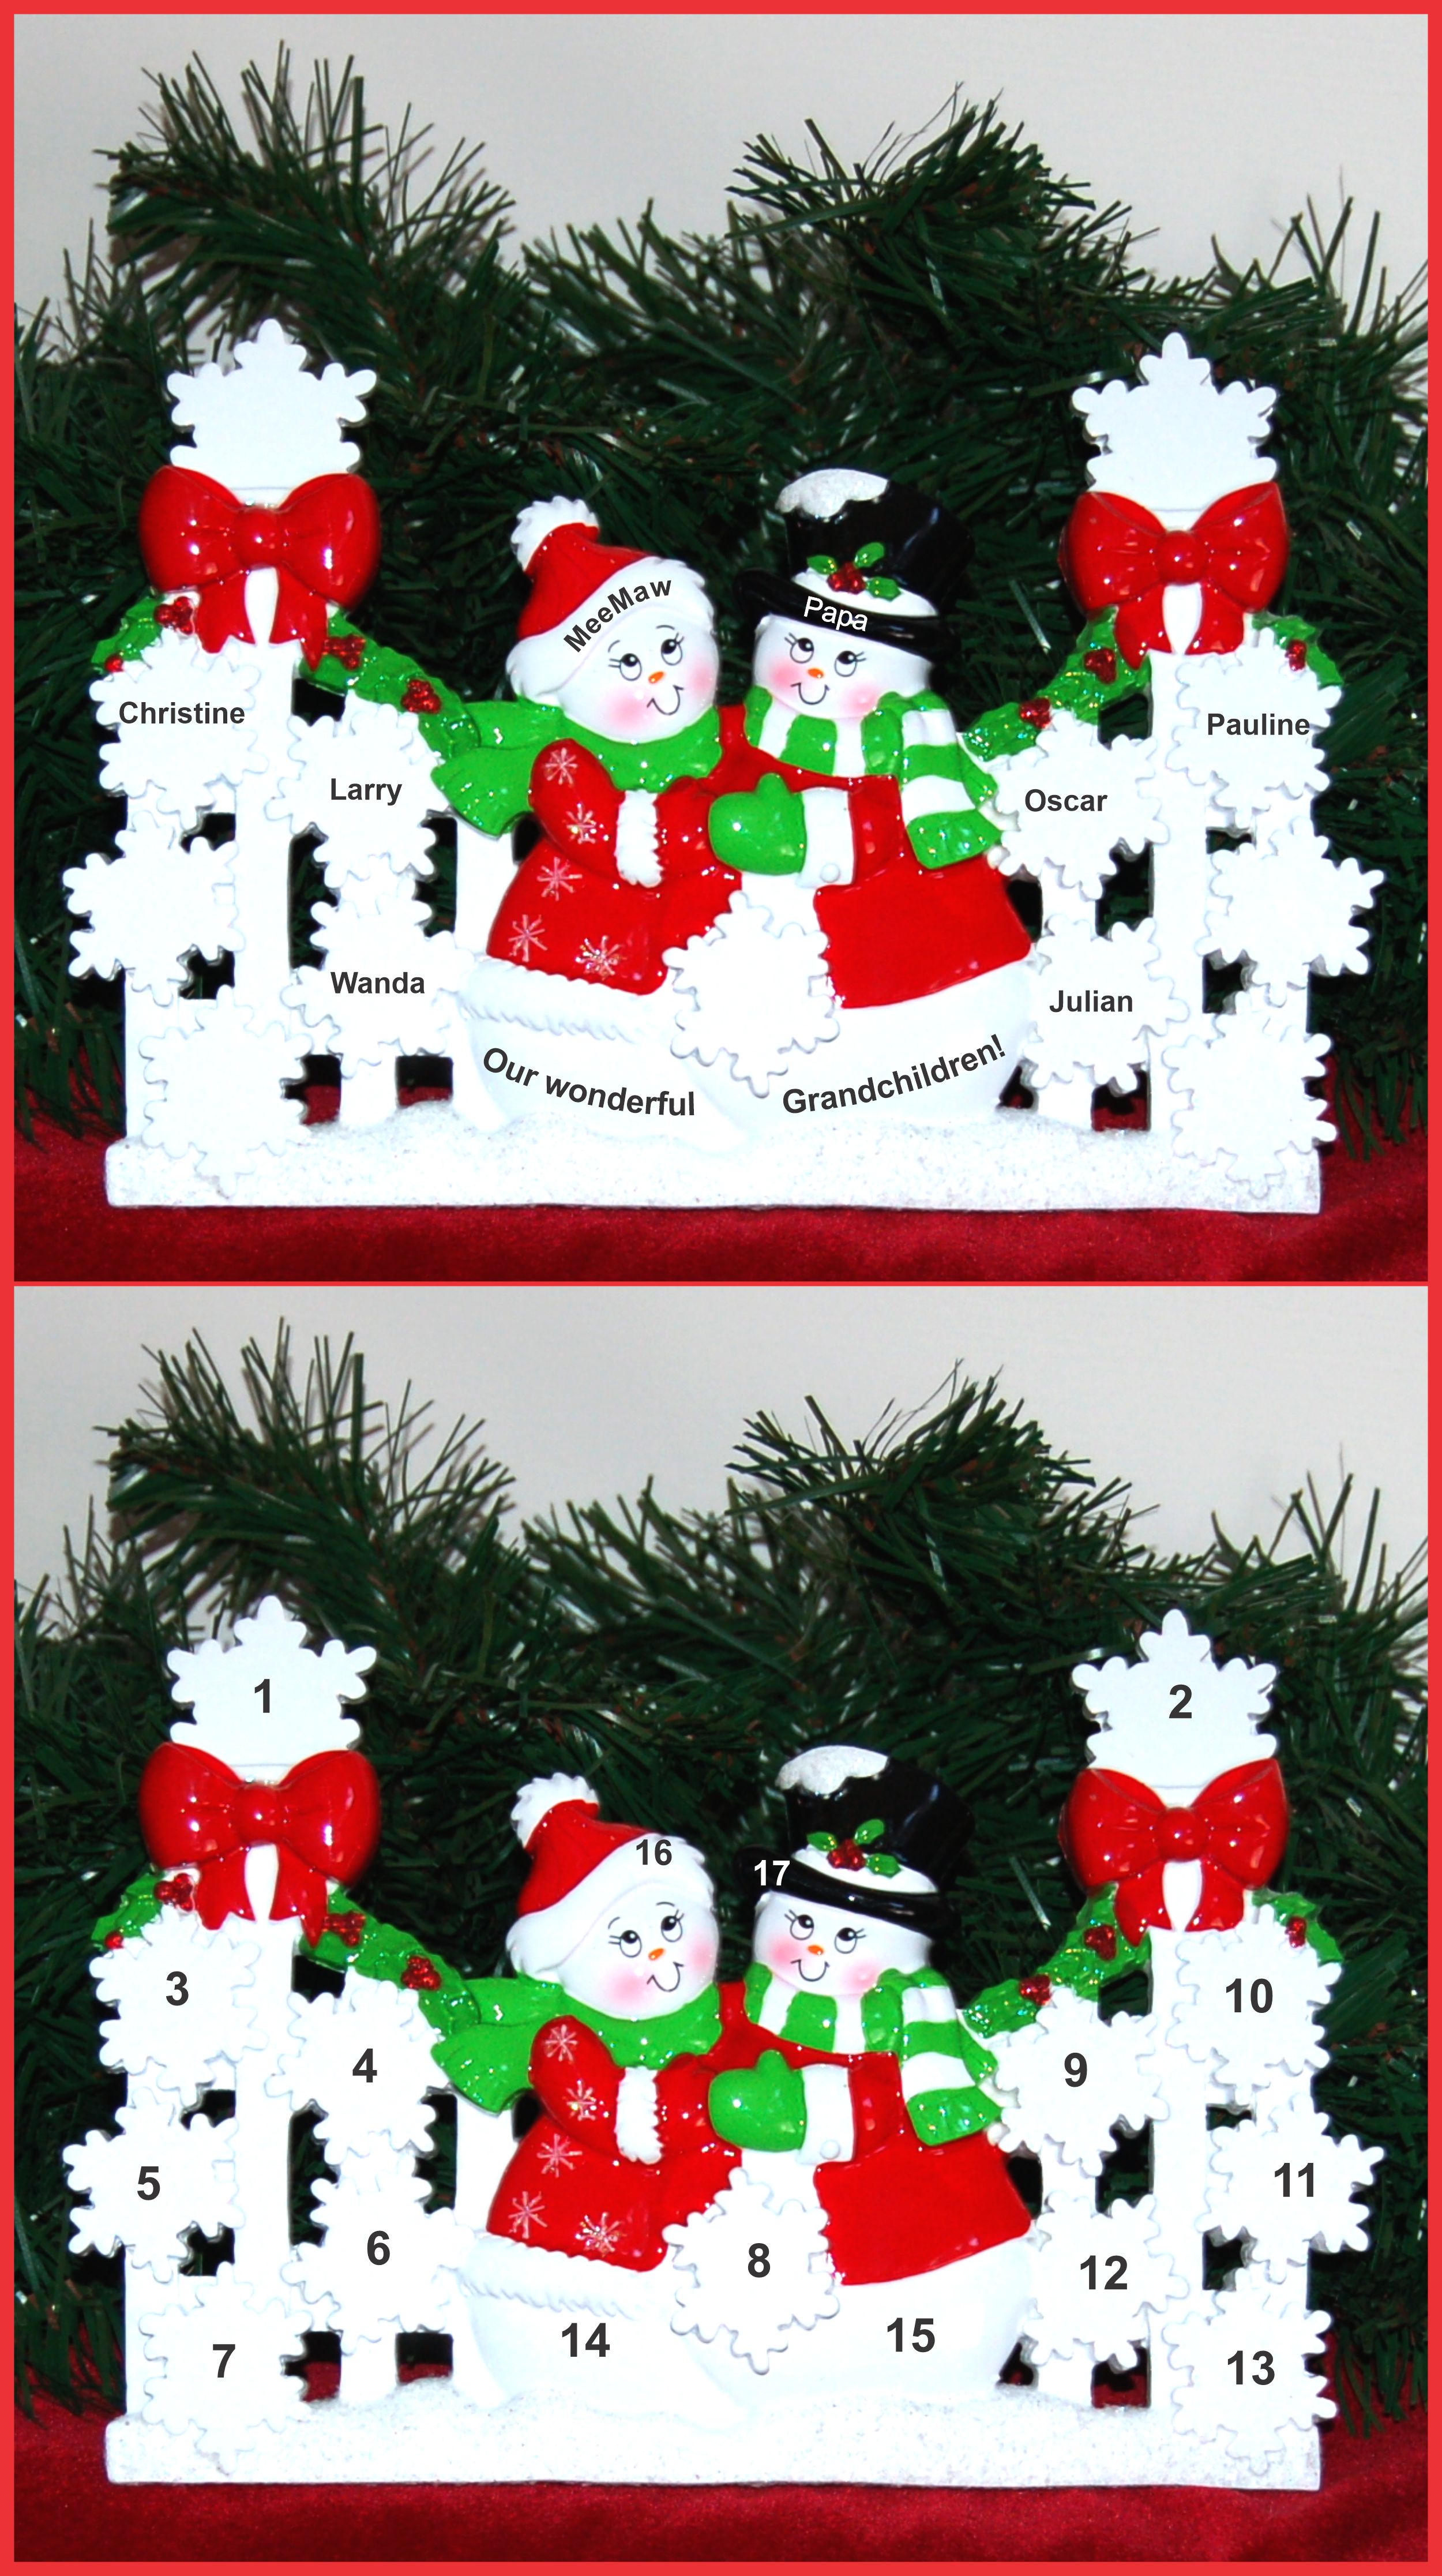 Grandparents Tabletop Christmas Decoration Snowflakes for 6 Grandchildren Personalized by RussellRhodes.com